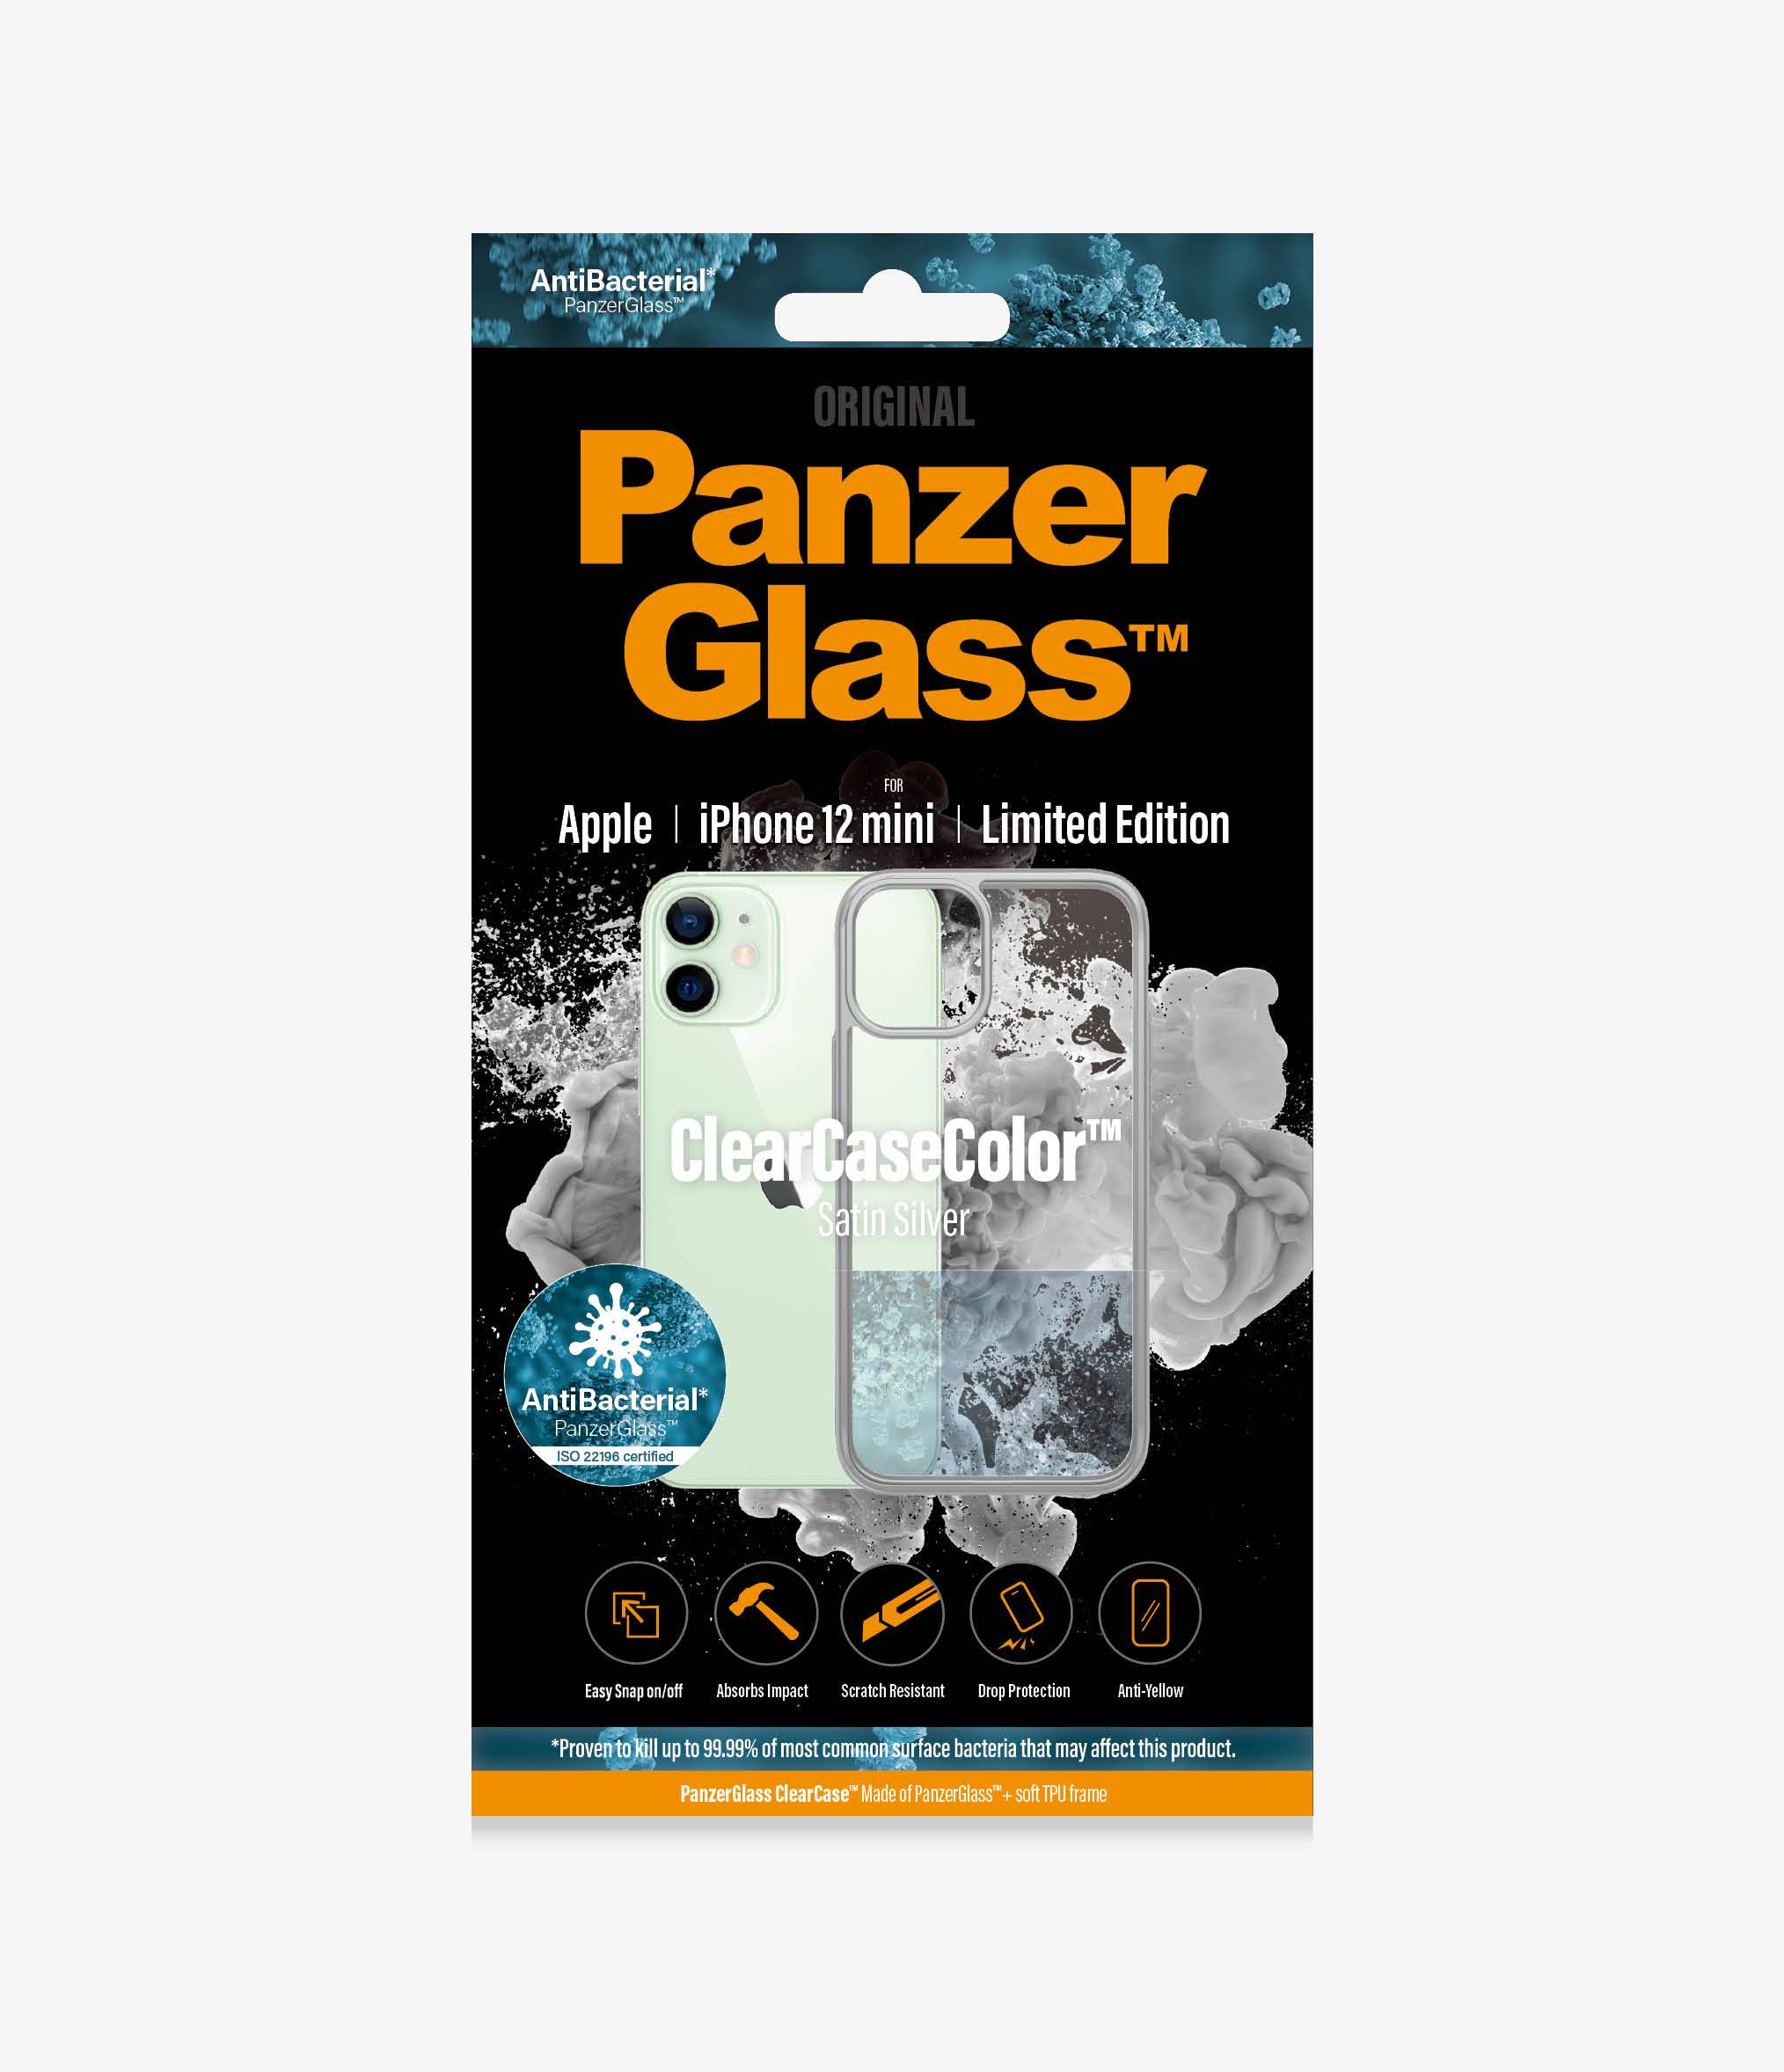 PanzerGlass™ ClearCaseColor™ Apple iPhone 12 mini - Satin Silver Limited Edition (0270), Slim fashionable design, Tempered anti-aging glass back